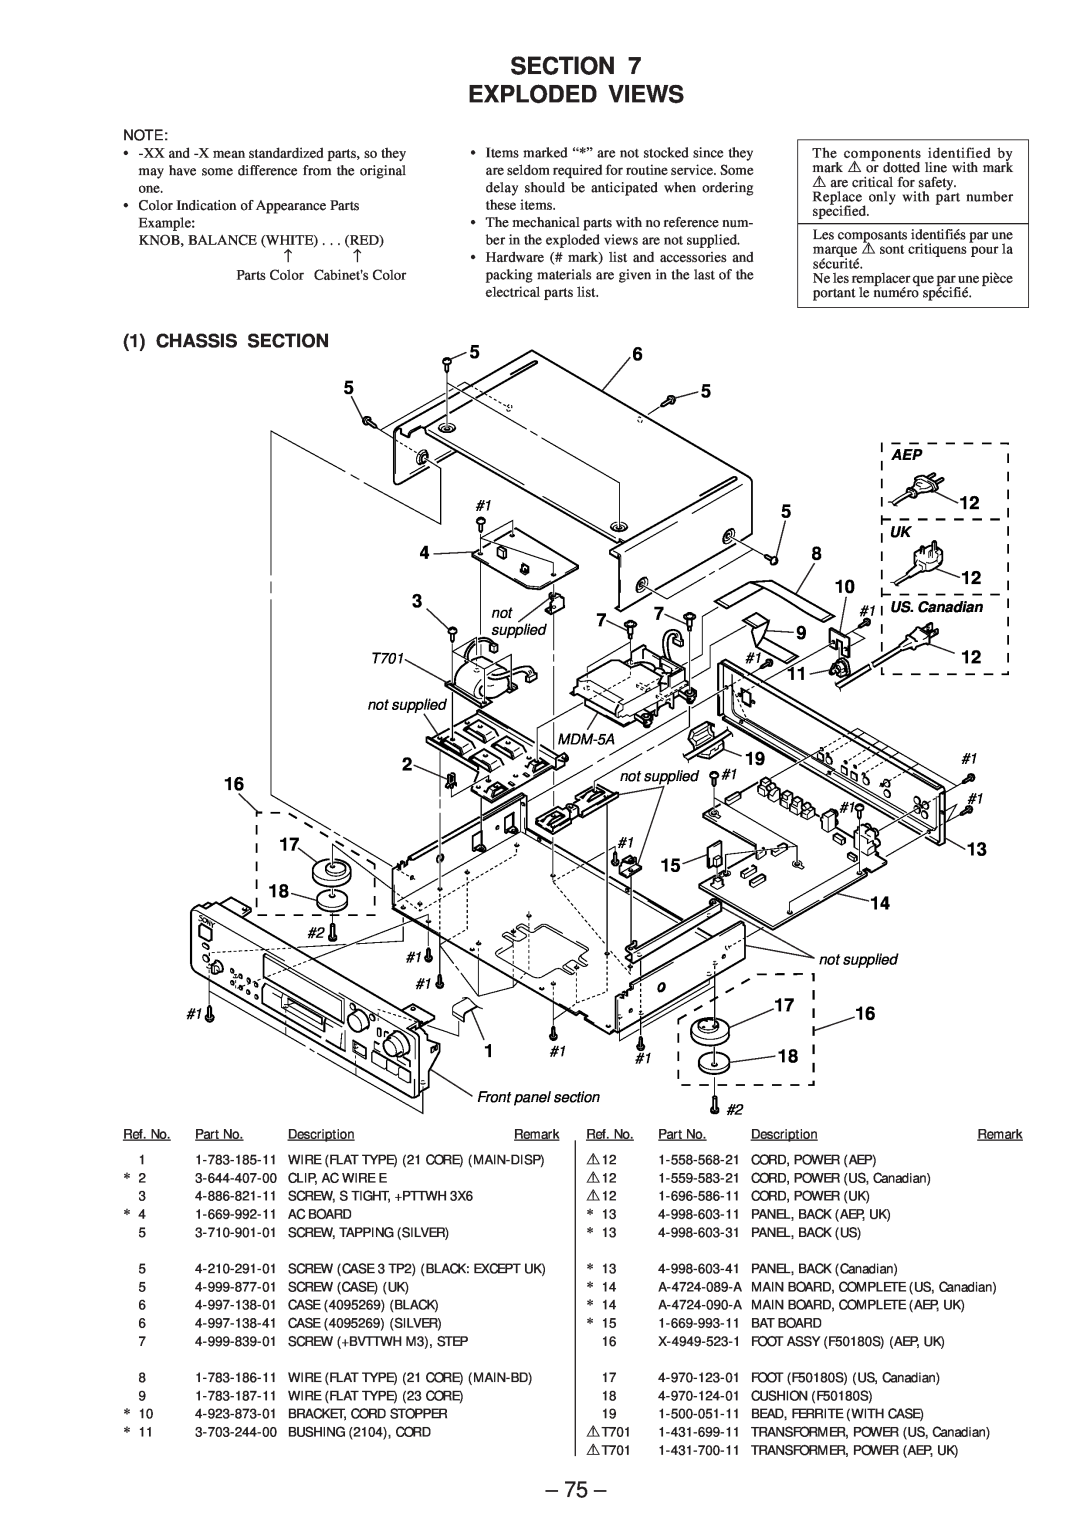 Sony MDS-JB920 service manual Section Exploded Views, 75, Chassis, 2 16 17 18, 15 14 